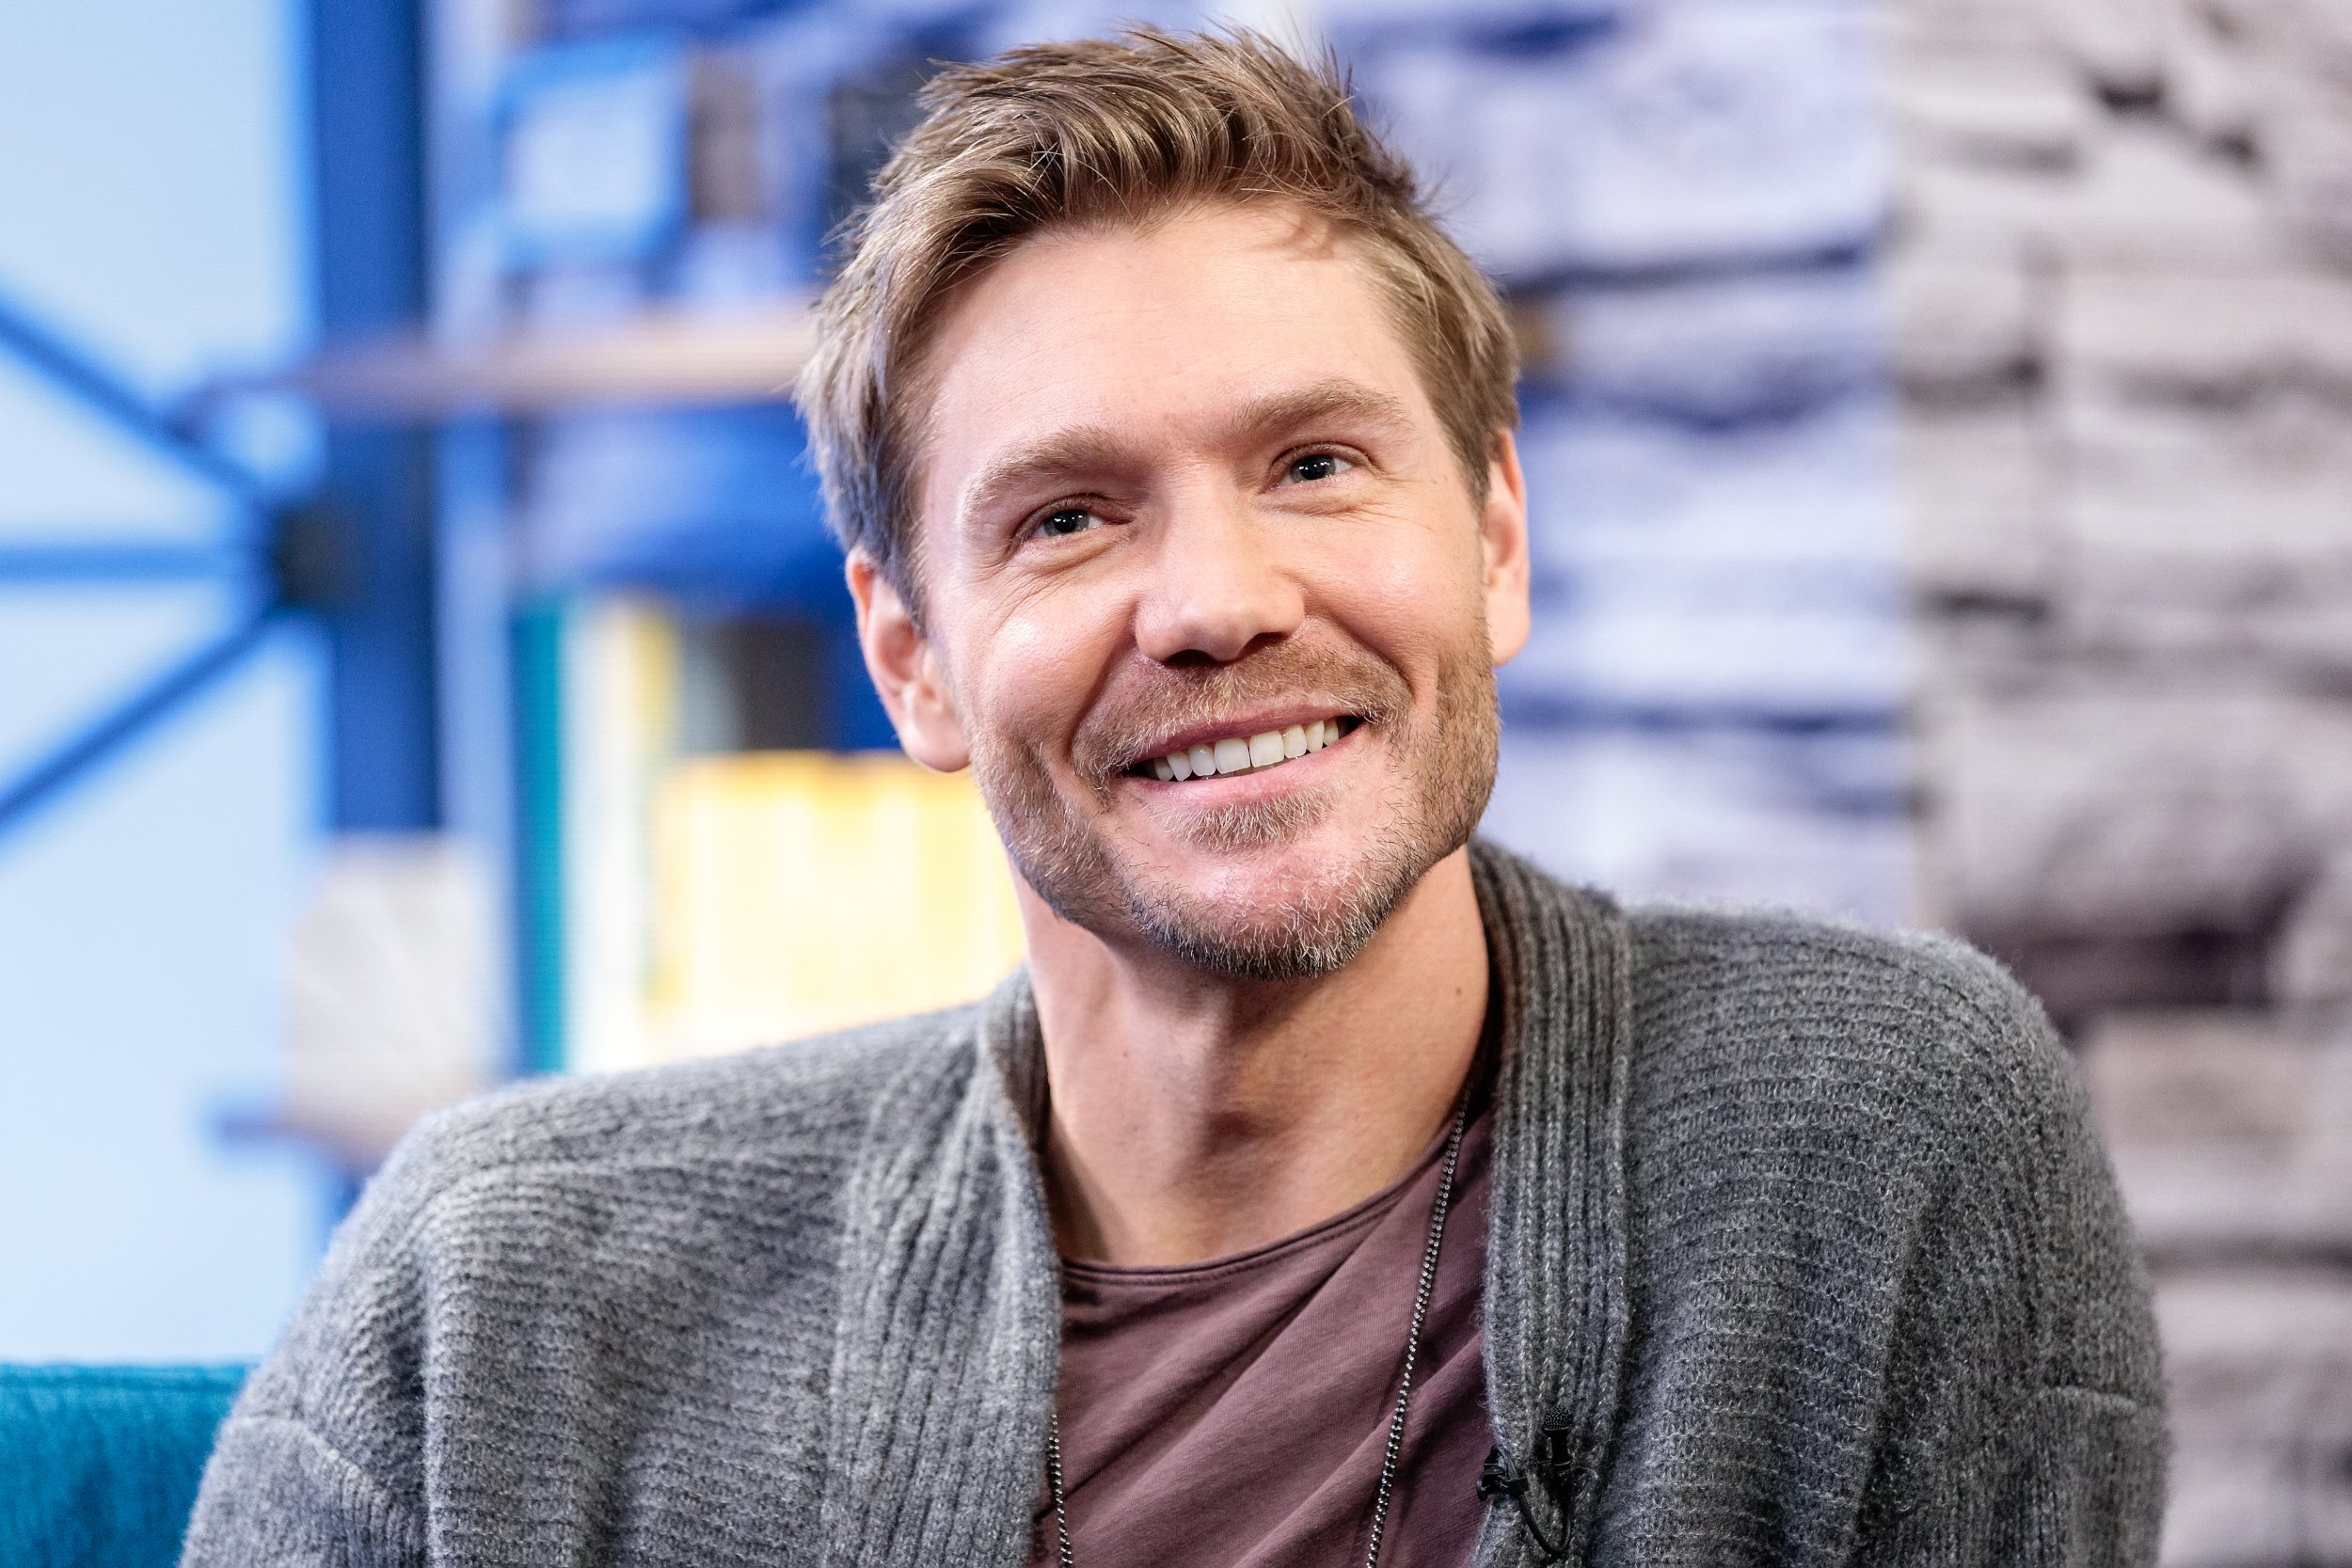 'Gilmore Girls' alum Chad Michael Murray wearing a grey sweater and smiling